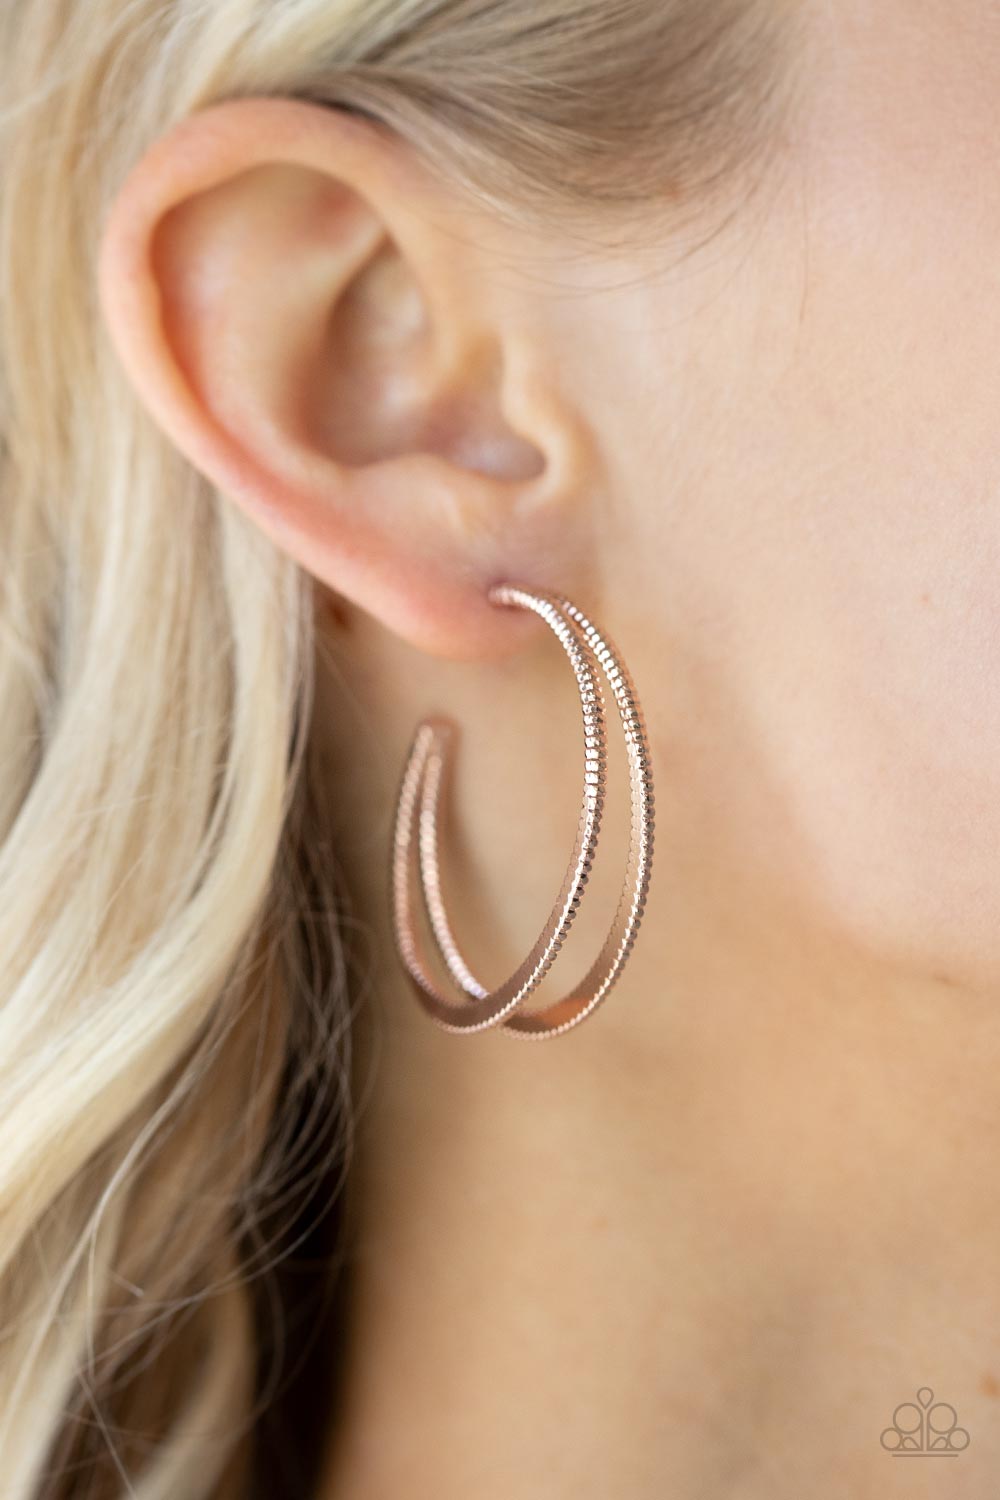 Rustic Curves Rose Gold Hoop Earring - Paparazzi Accessories  Featuring textured edges, two rose gold crescent frames delicately curve into a bold double hoop for an edgy urban look. Earring attaches to a standard post fitting. Hoop measures approximately 1 1/2" in diameter.  All Paparazzi Accessories are lead free and nickel free!   Sold as one pair of hoop earrings.